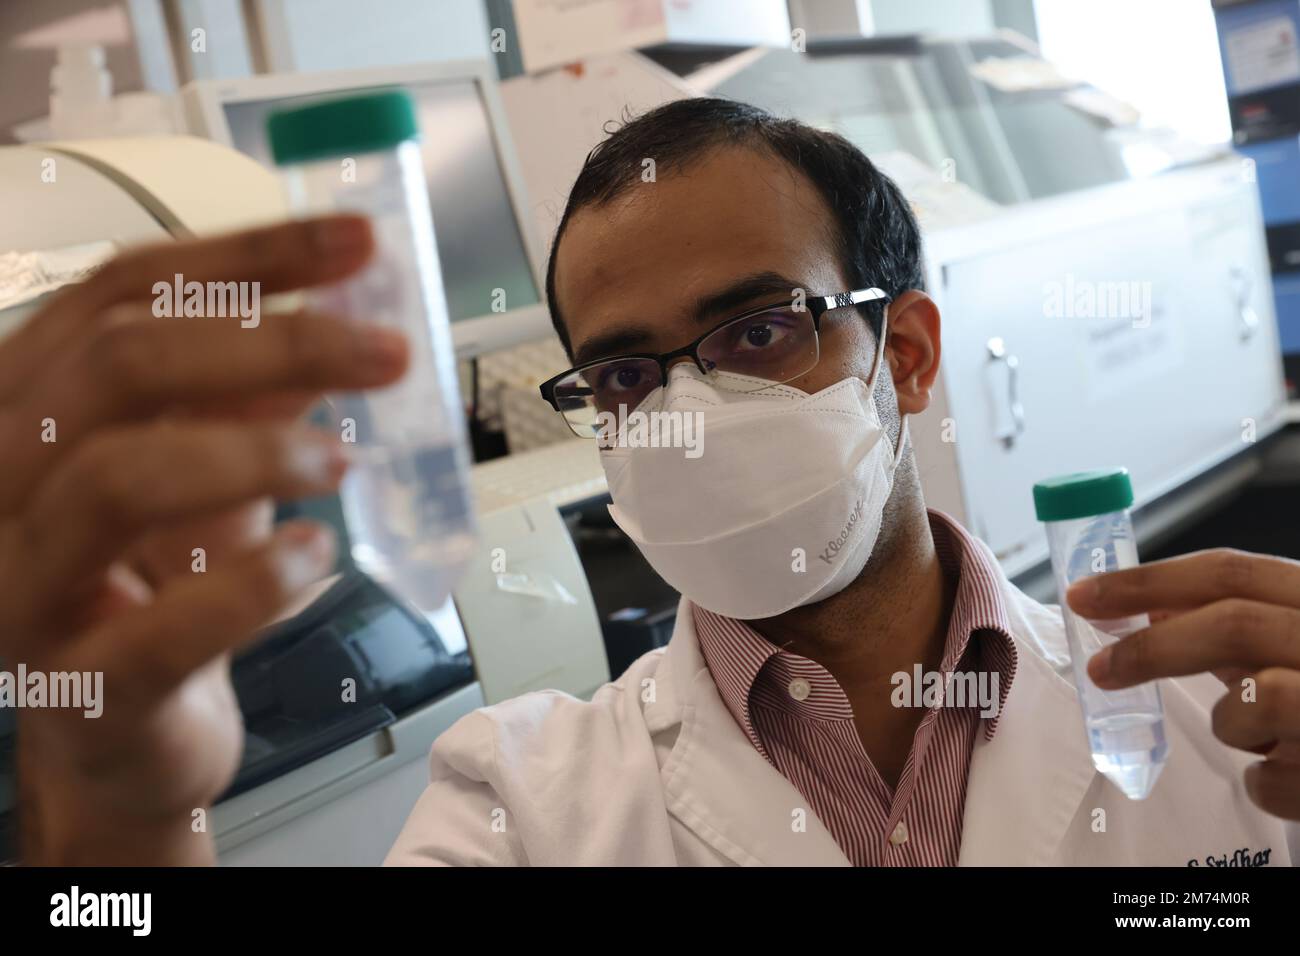 Dr Siddharth Sridhar, Clinical Assistant Professor, Department of Microbiology, School of Clinical Medicine, Li Ka Shing Faculty of Medicine, The University of Hong Kong.05MAY22.  Dickson Lee / SCMP Stock Photo